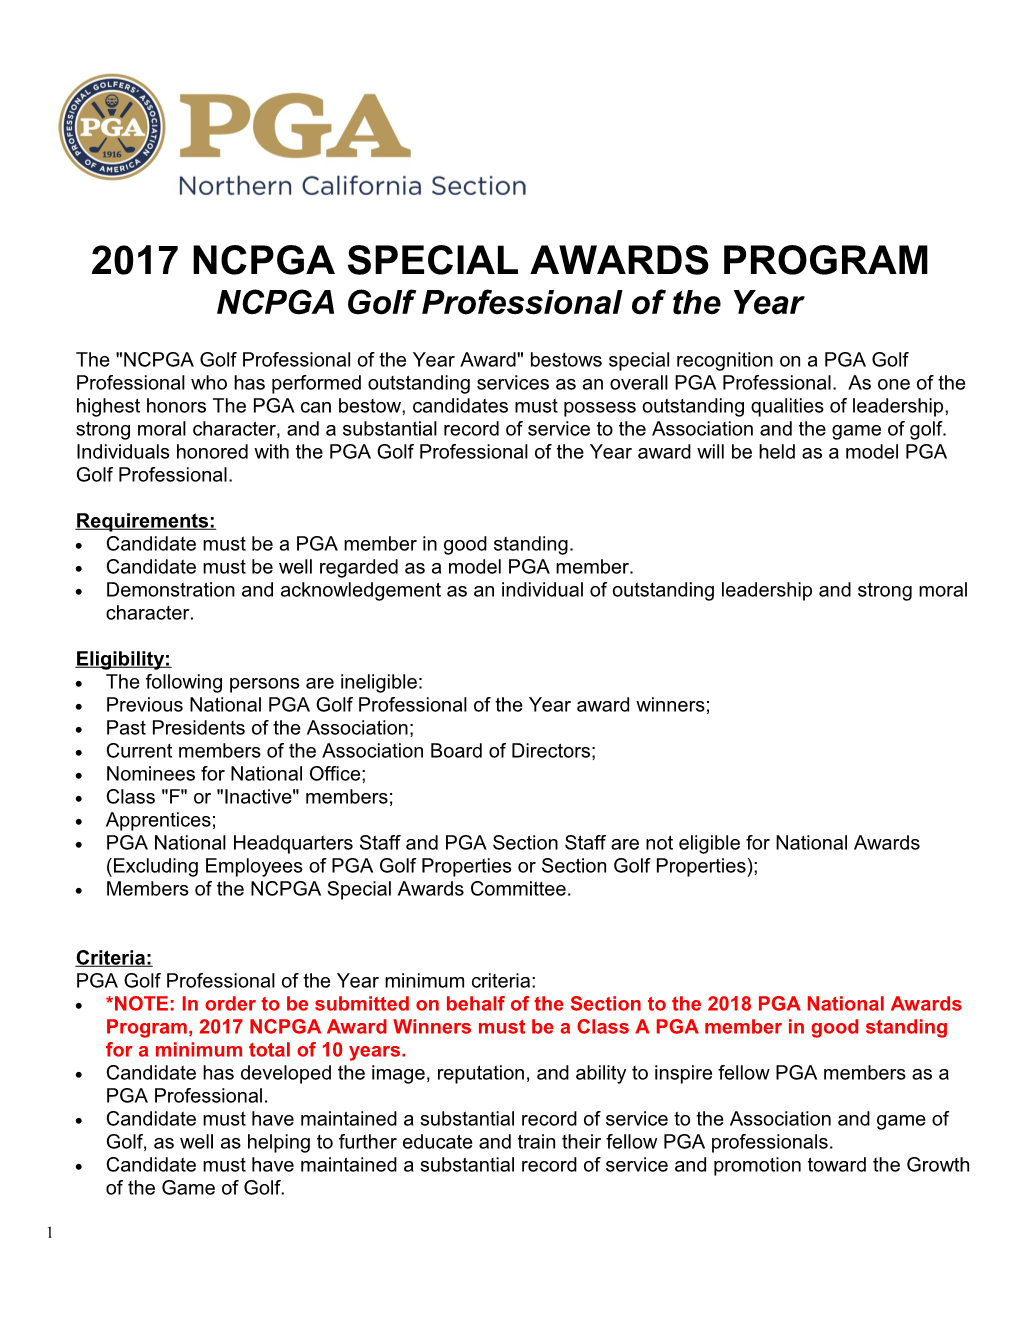 NCPGA Golf Professional of the Year